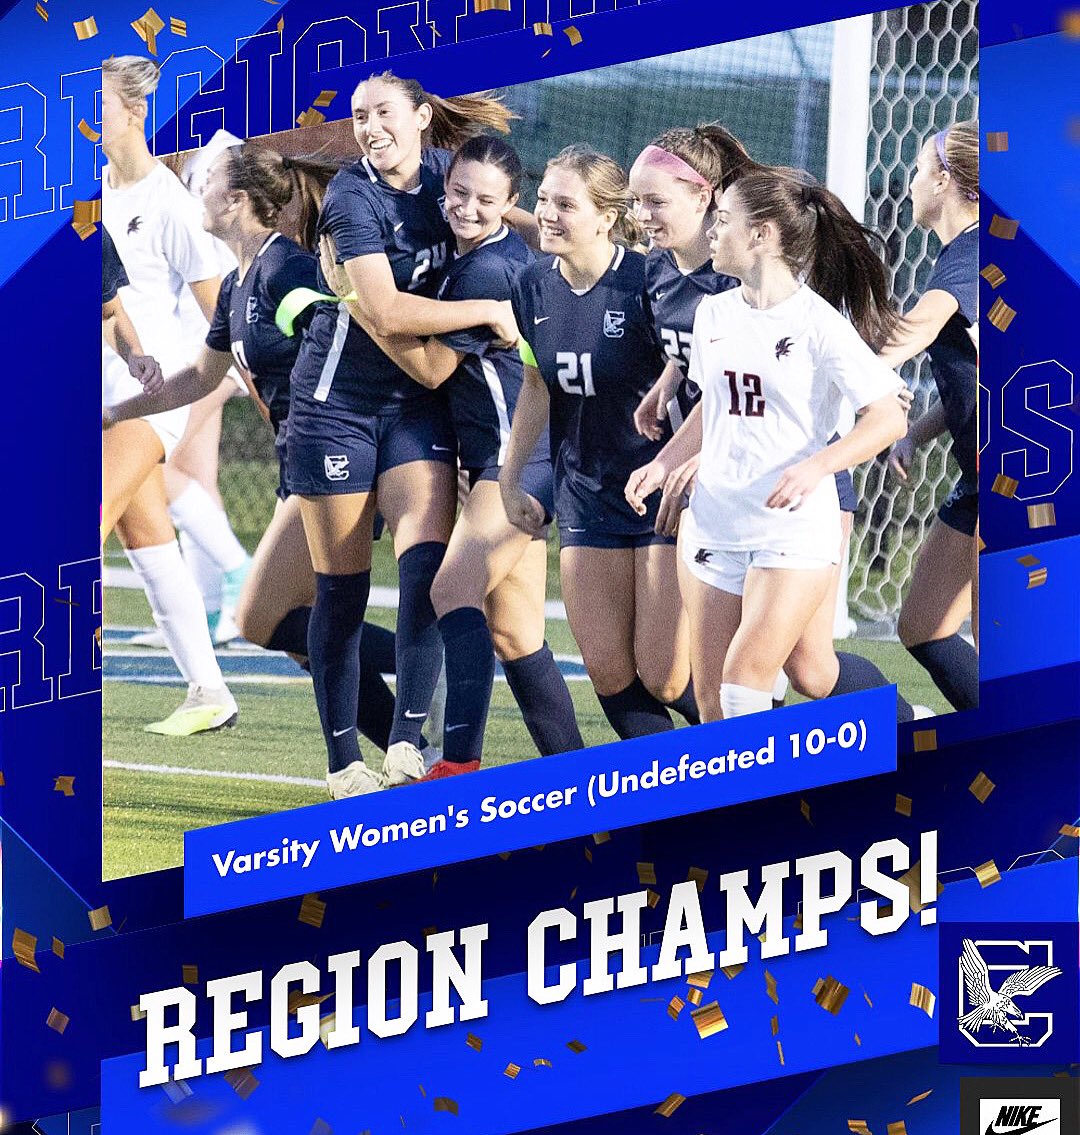 Your Lady Eagles are UNDEFEATED in region play this season with a record of 10-0. Congratulations on an amazing accomplishment! 👏🏼#regionchamps @BlueEagleAD @CHS_BlueEagles @9GC_BlueEagles @csd_super @coachwoolbright